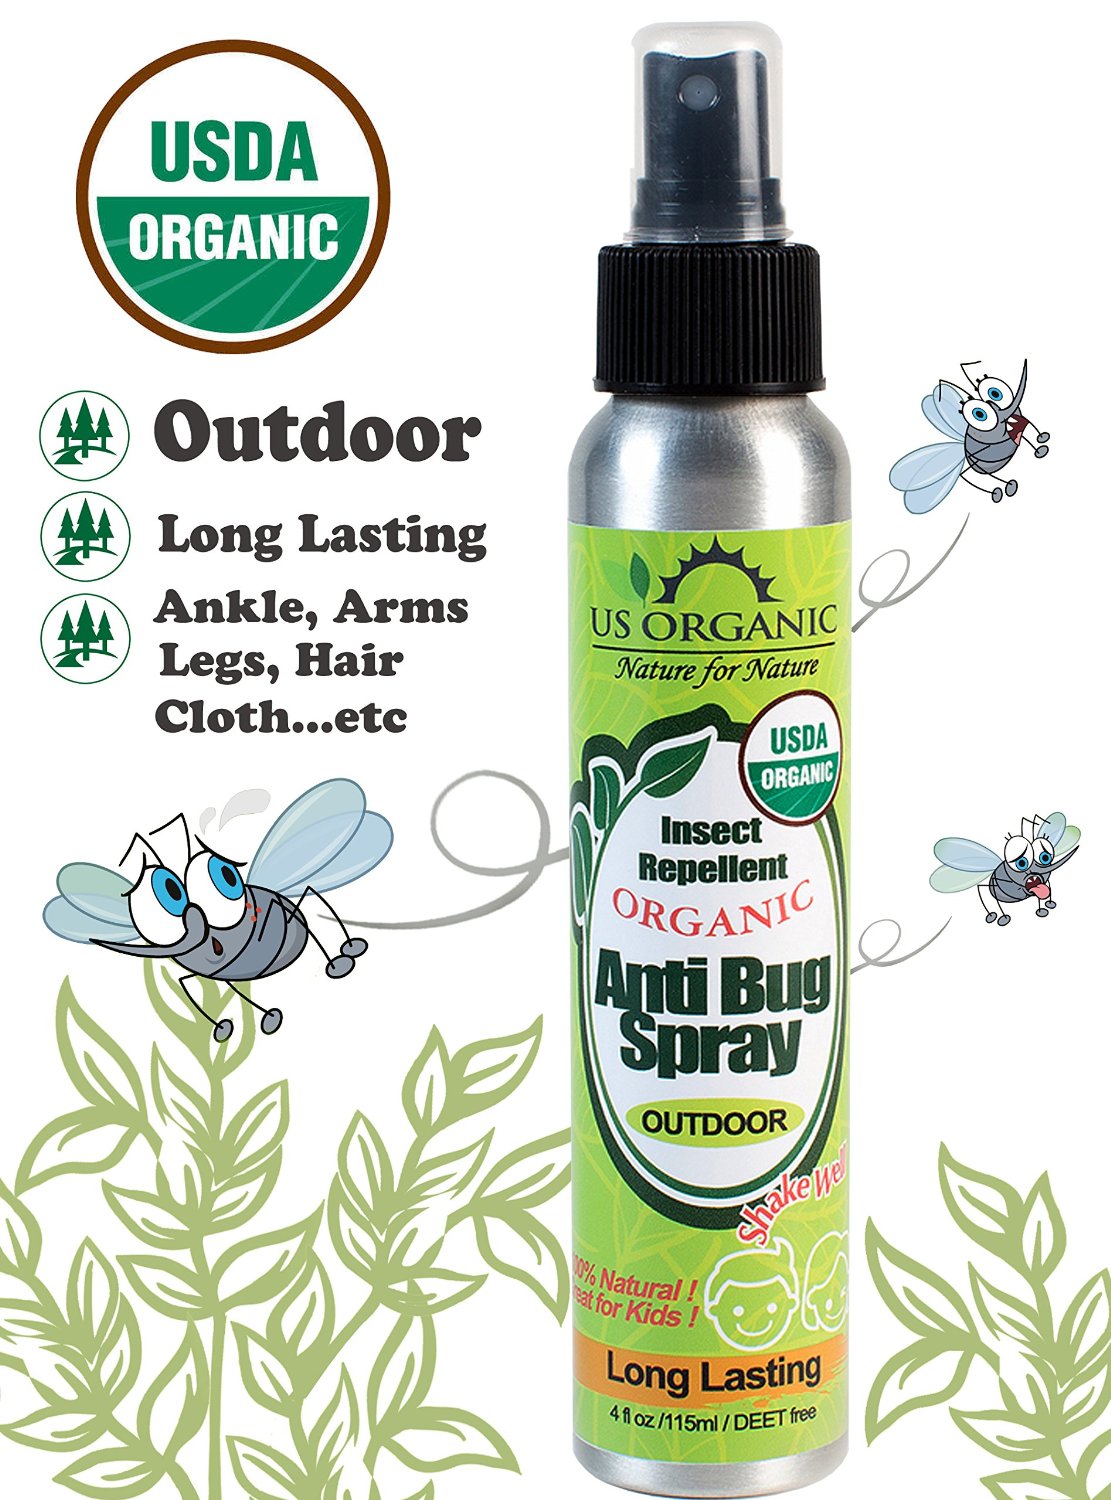 Natural Insect Repellent Recipes for a Pest-Free Life